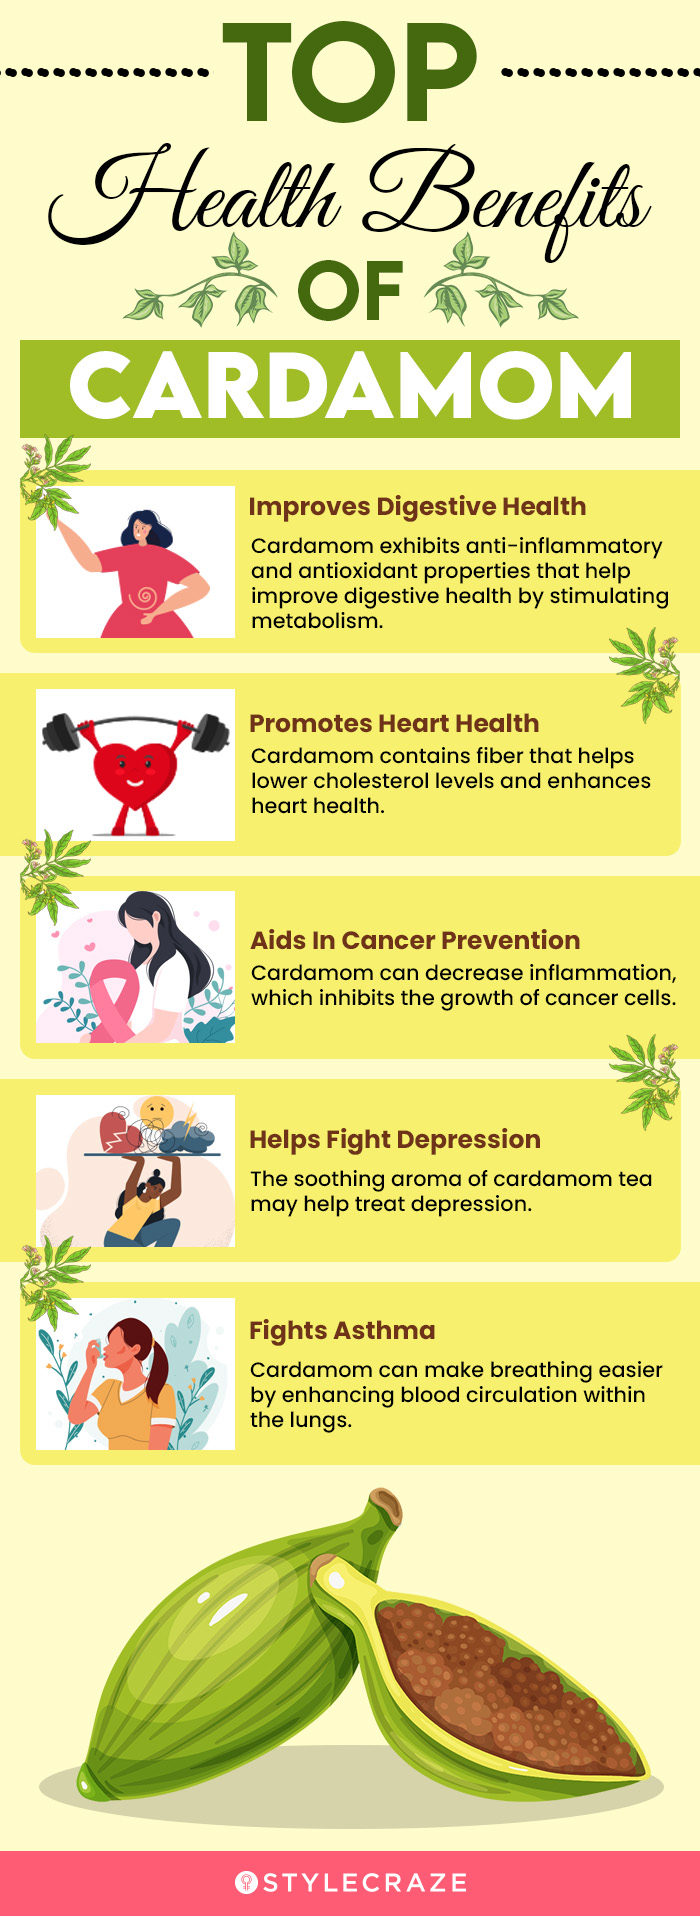 top health benefits of cardamom [infographic]